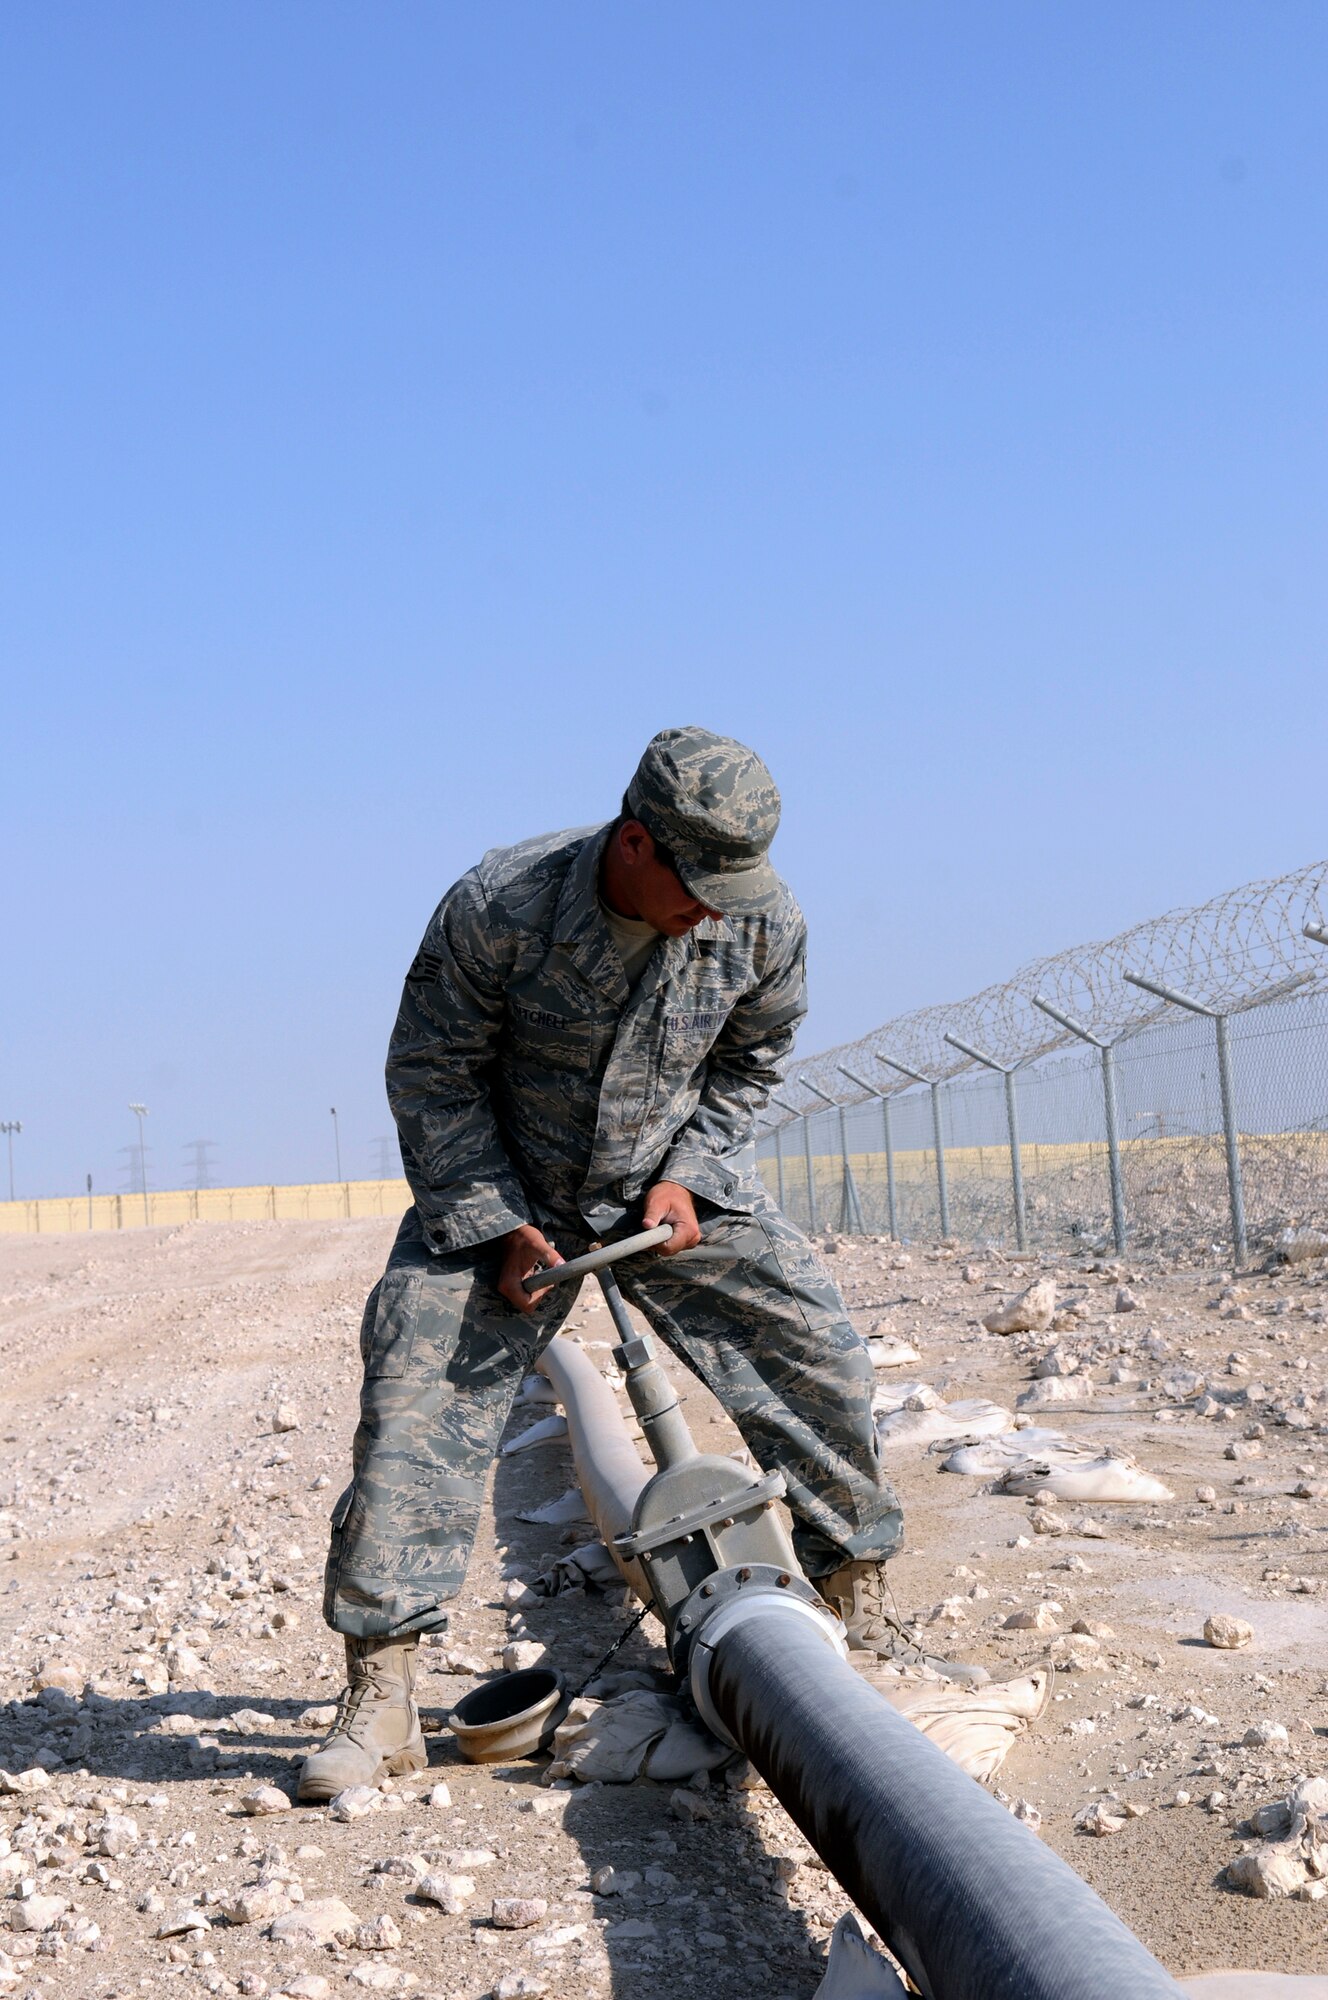 Staff Sgt. George Mitchell, fuels craftsman assigned to the 379th Expeditionary Logistics Readiness Squadron, straightens a gate valve that was laying on its side during a security and leak check of the fuel pipeline from bulk storage to operating storage, Nov. 14, at an undisclosed air base in Southwest Asia.  "Running the line" is a preventative procedure that keeps the fuel flowing to "fuel the fight."  Approximately one million gallons of fuel are moved each day through the 379 ELRS fuels section, keeping aircraft flying in Operations Iraqi and Enduring Freedom and Joint Task Force-Horn of Africa.  Sergeant Mitchell, a native of Lady Lake, Fla., is deployed from Shaw Air Force Base, S.C.  (U.S. Air Force Base photo by Tech. Sgt. Michael Boquette/Released)